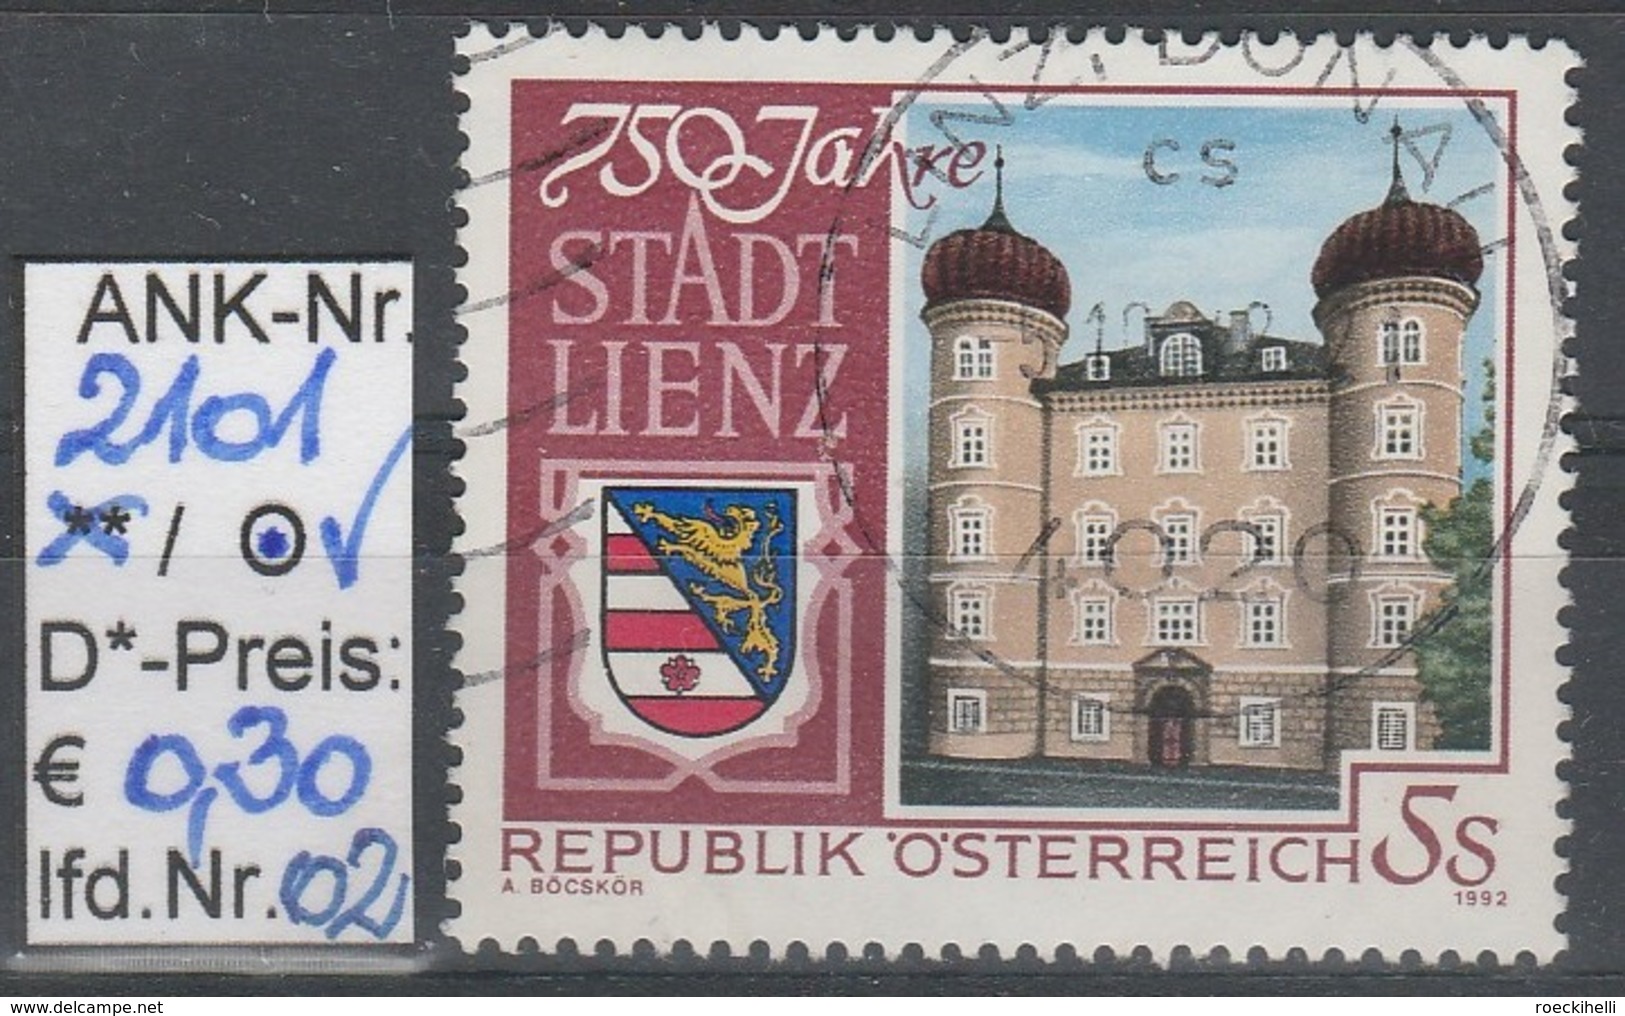 17.6.1992 -  SM  "750 Jahre Stadt Lienz"  -   O  Gestempelt  -  Siehe Scan  (2101o 01-06) - Used Stamps